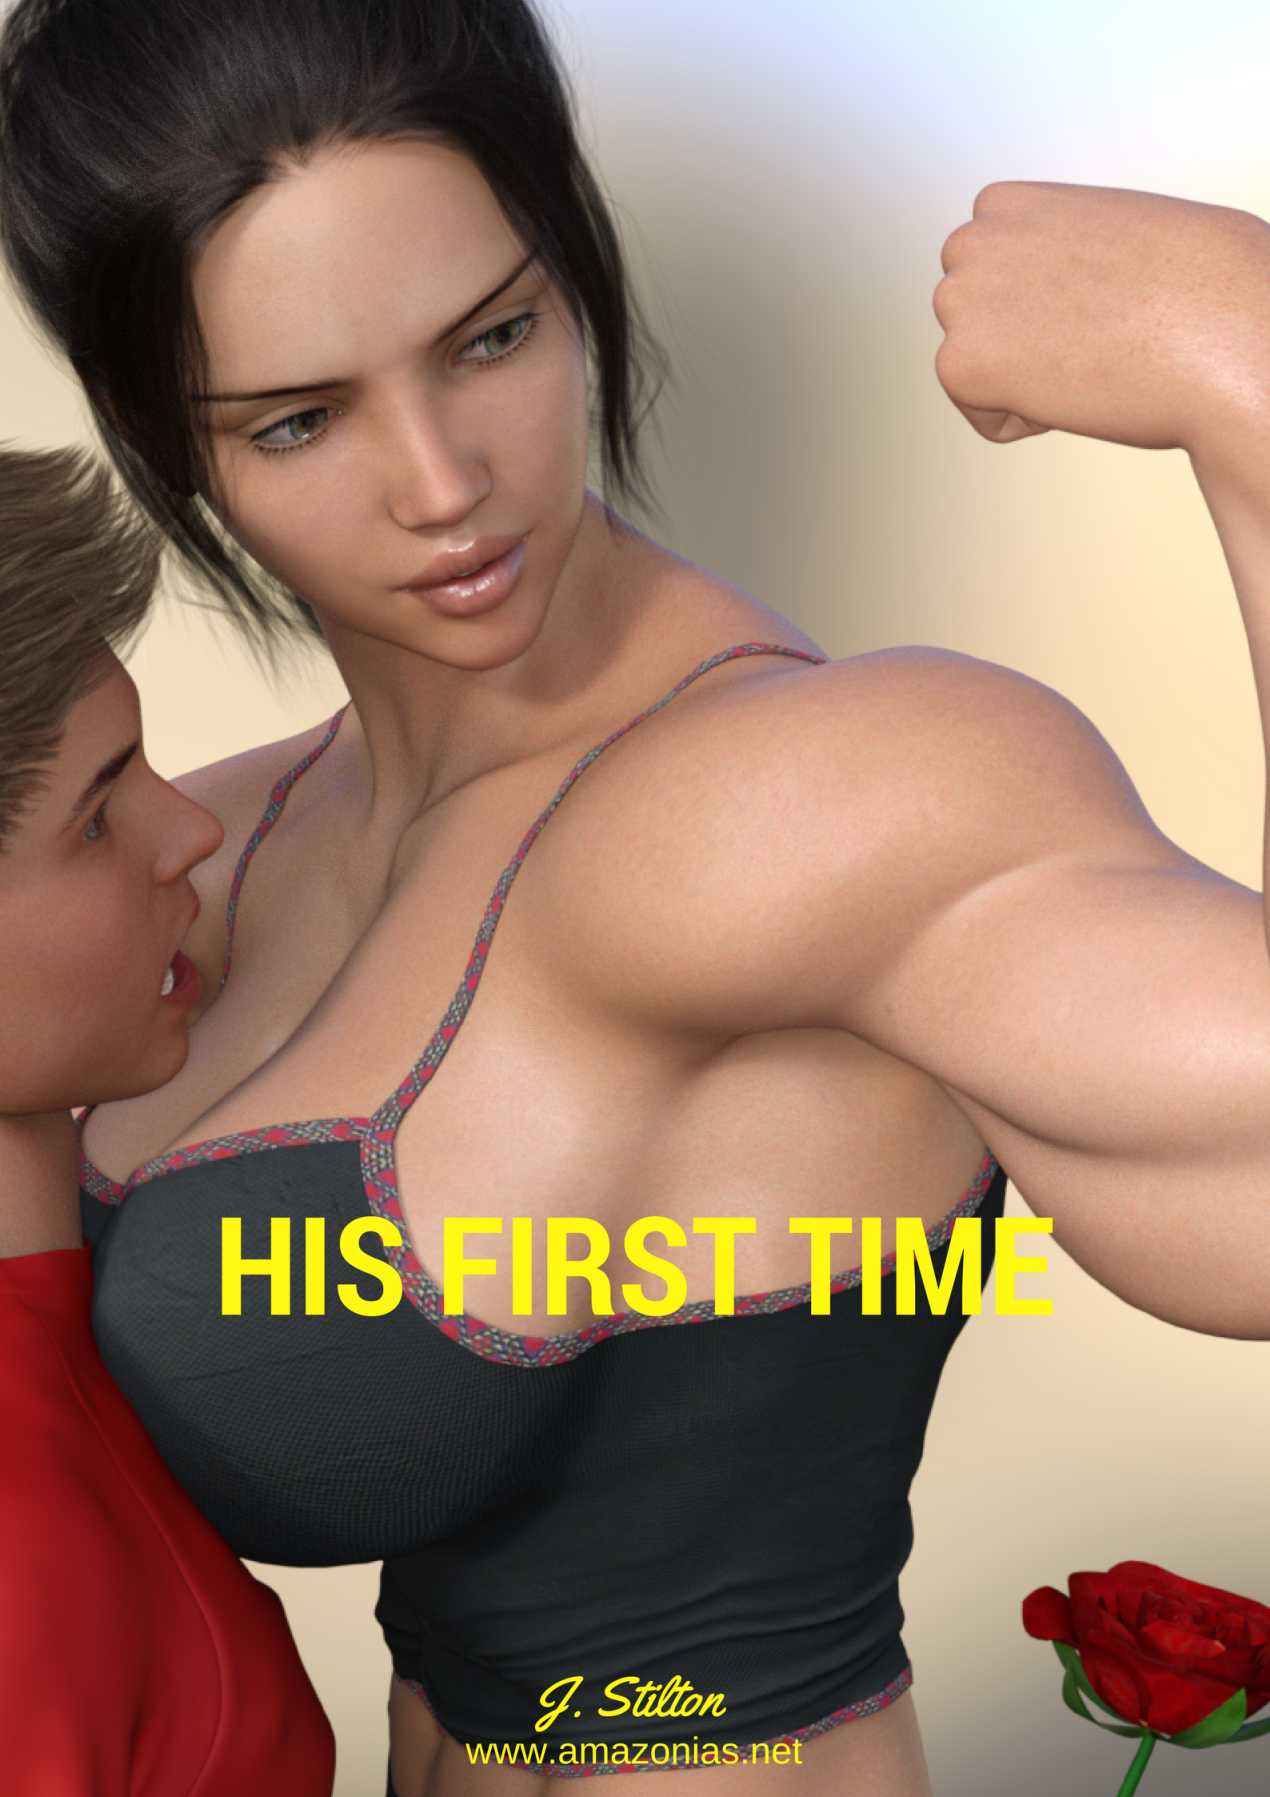 His first time - female bodybuilder 